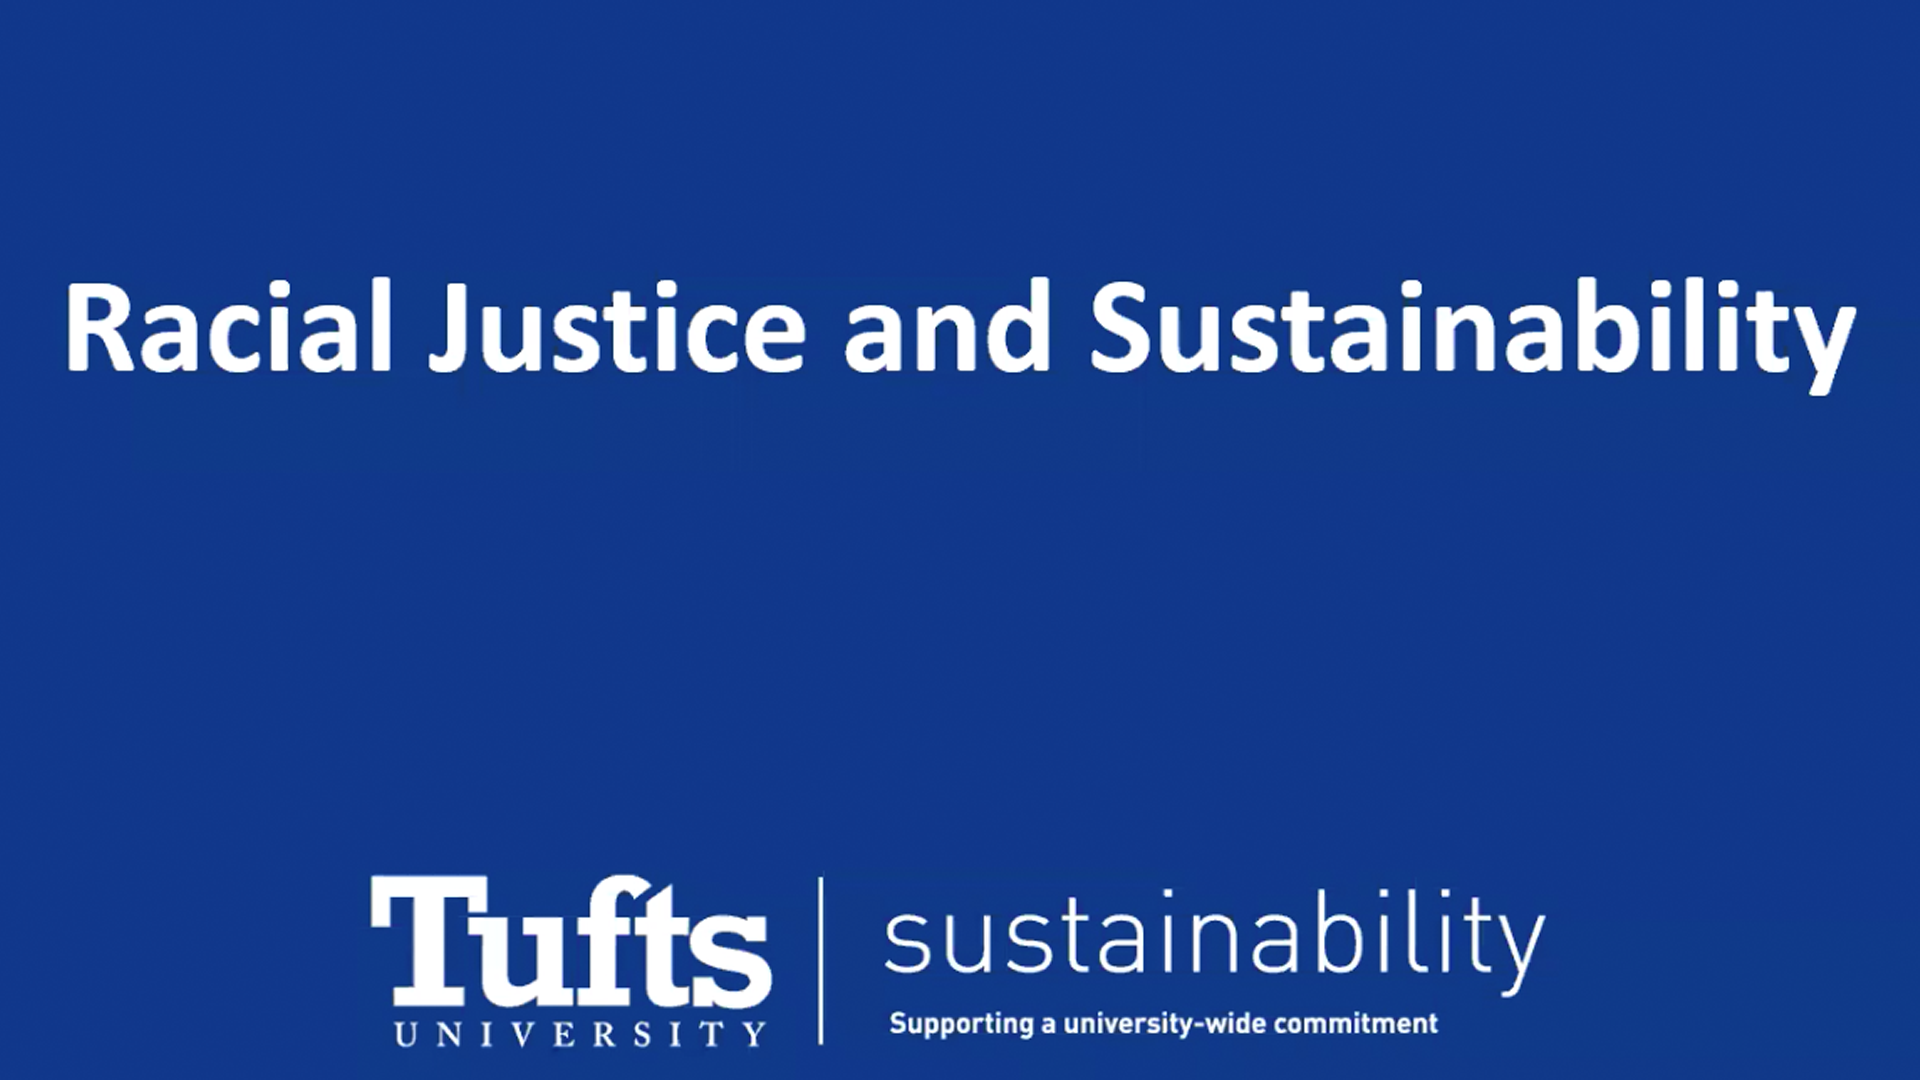 Racial Justice and Sustainability title card for the Office of Sustainability's Juneteenth event on this topic.